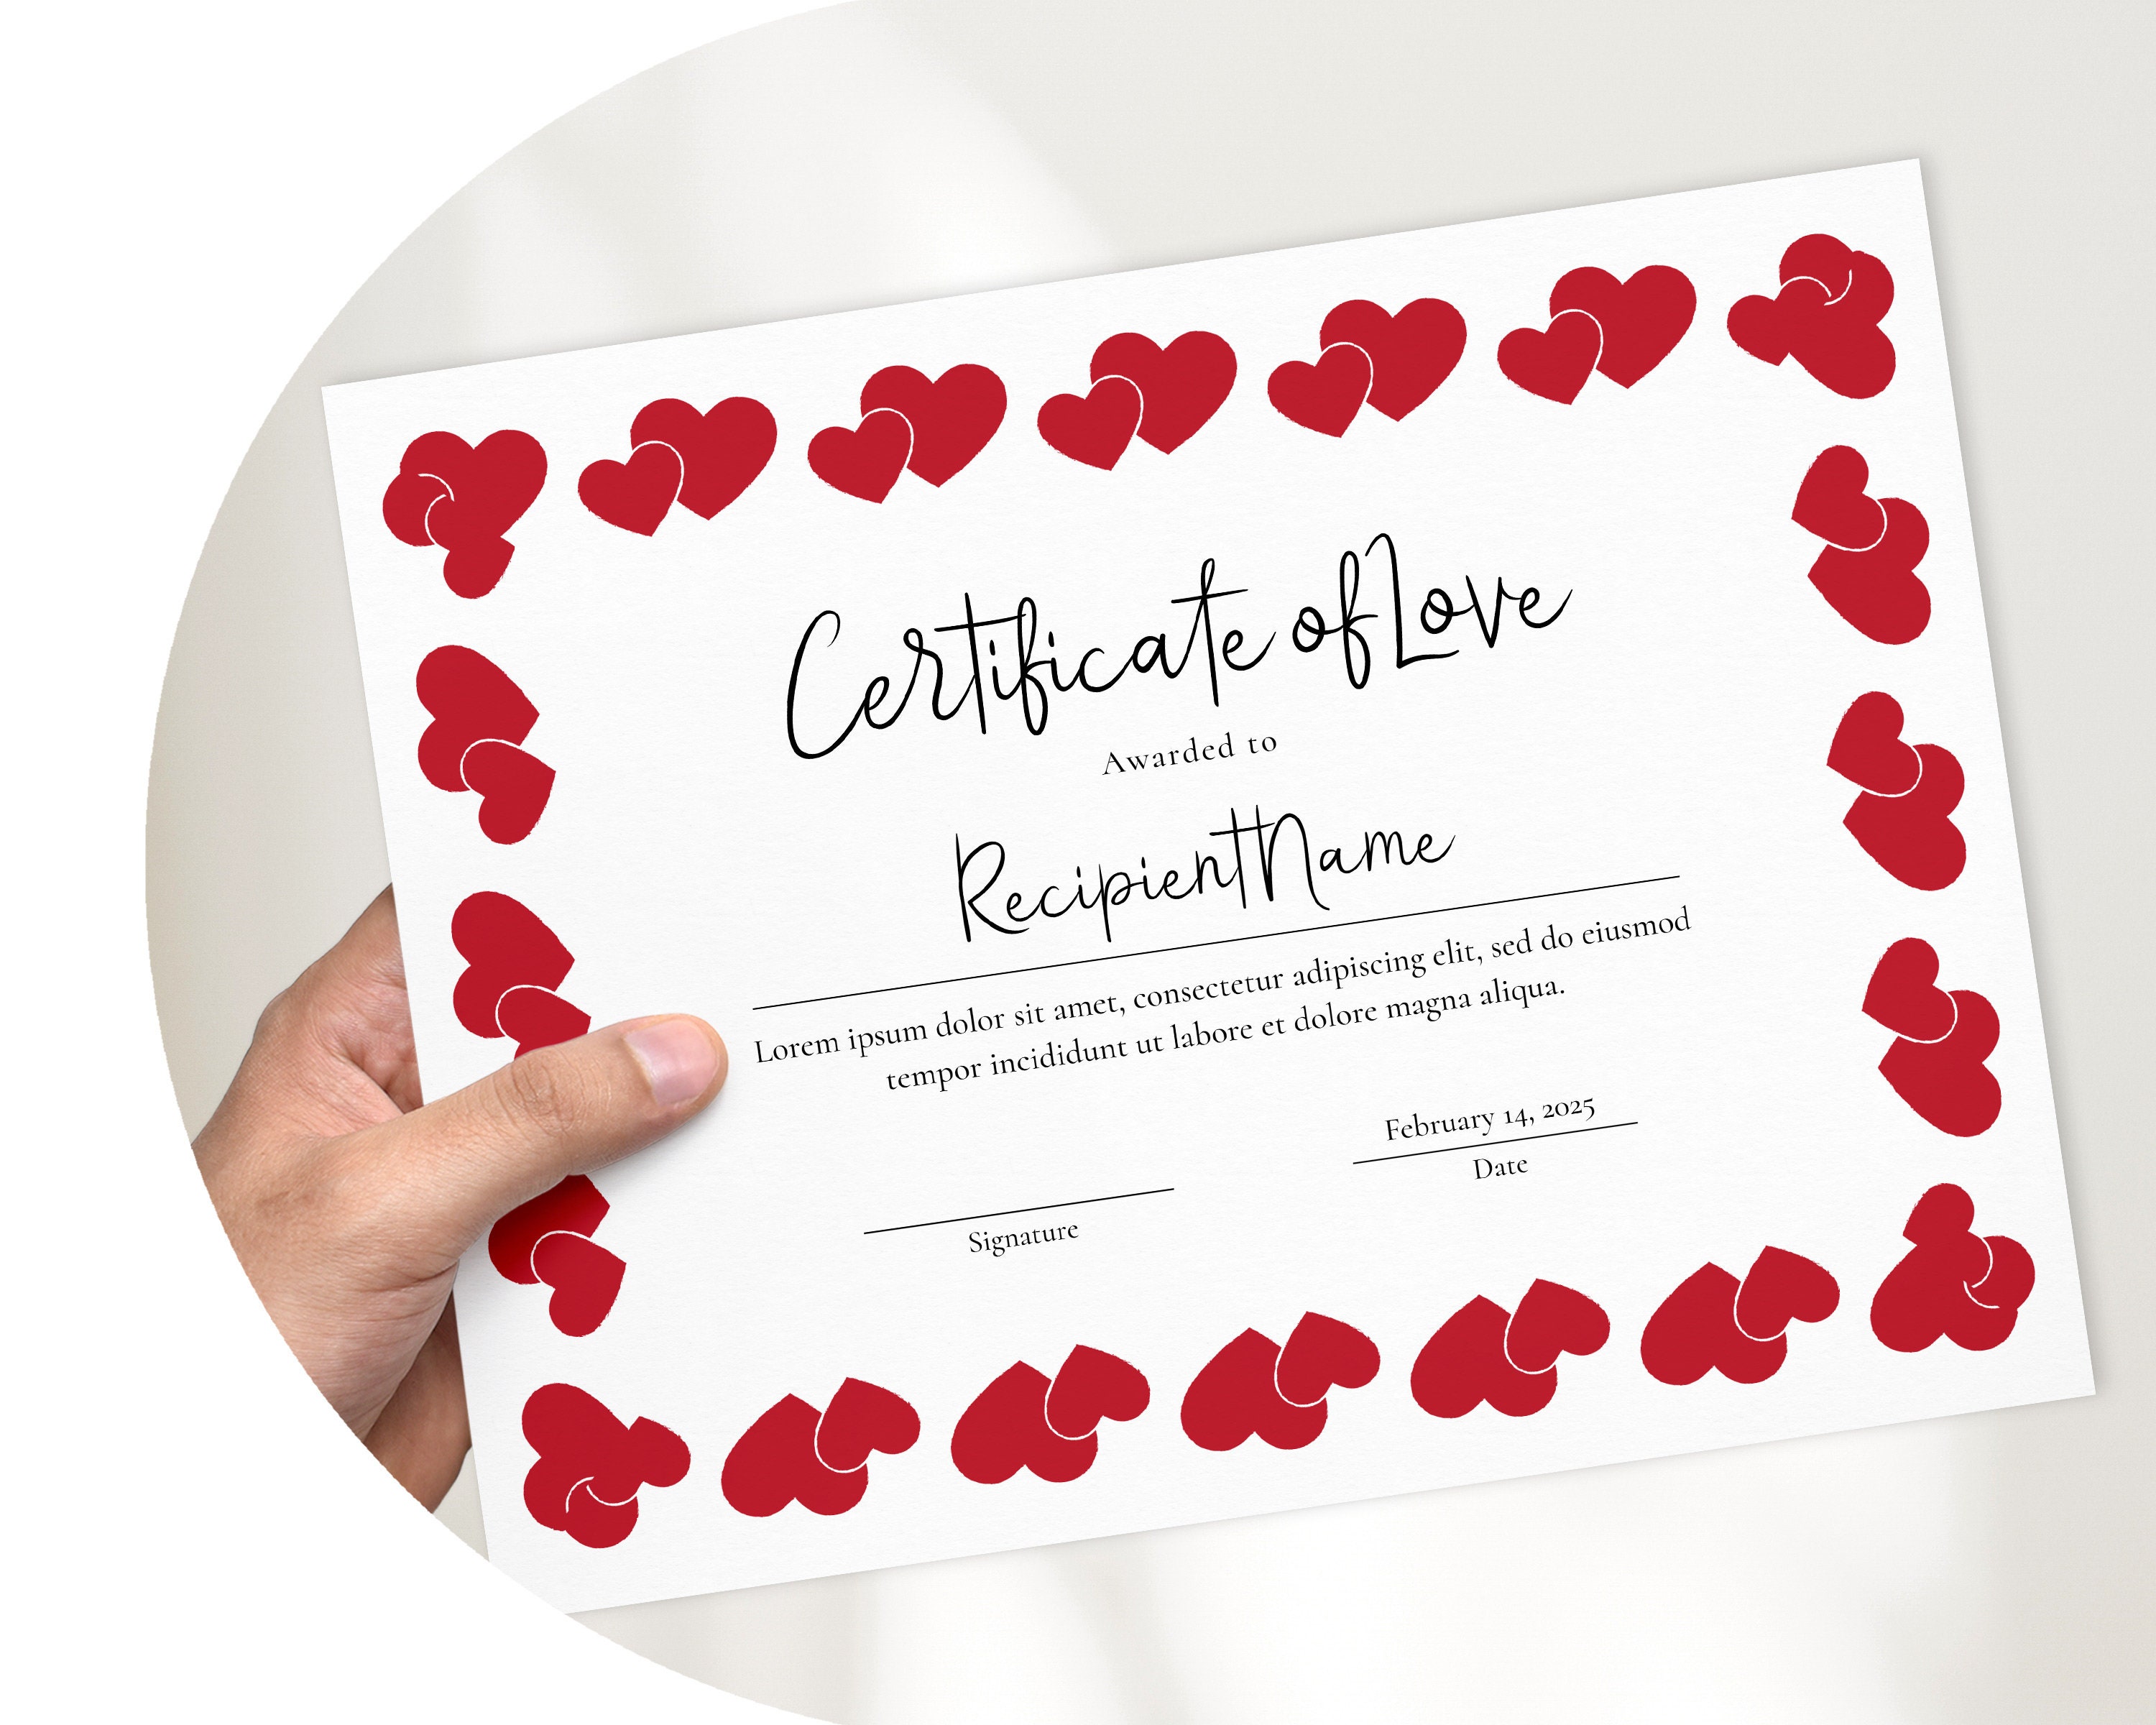 Personalized Valentines Day Spa Gift Certificate Template Editable